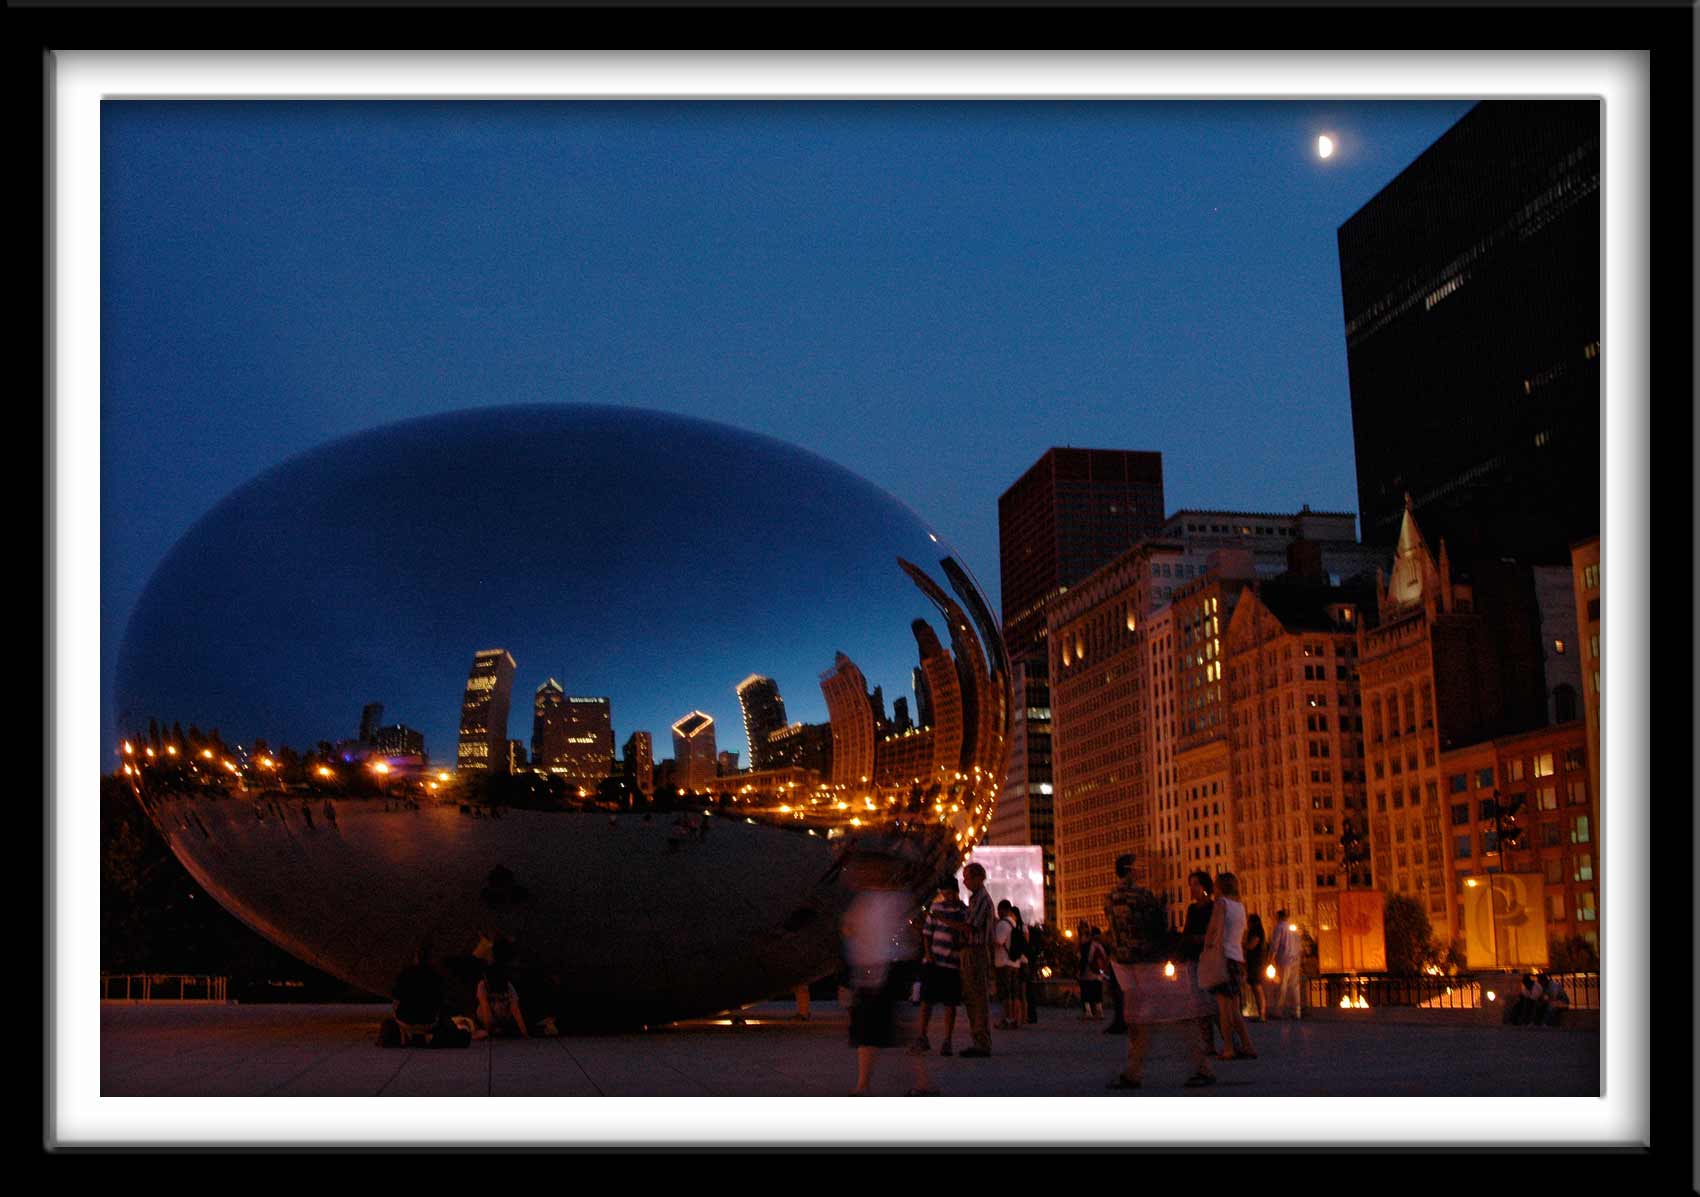 The Bean and the Moon